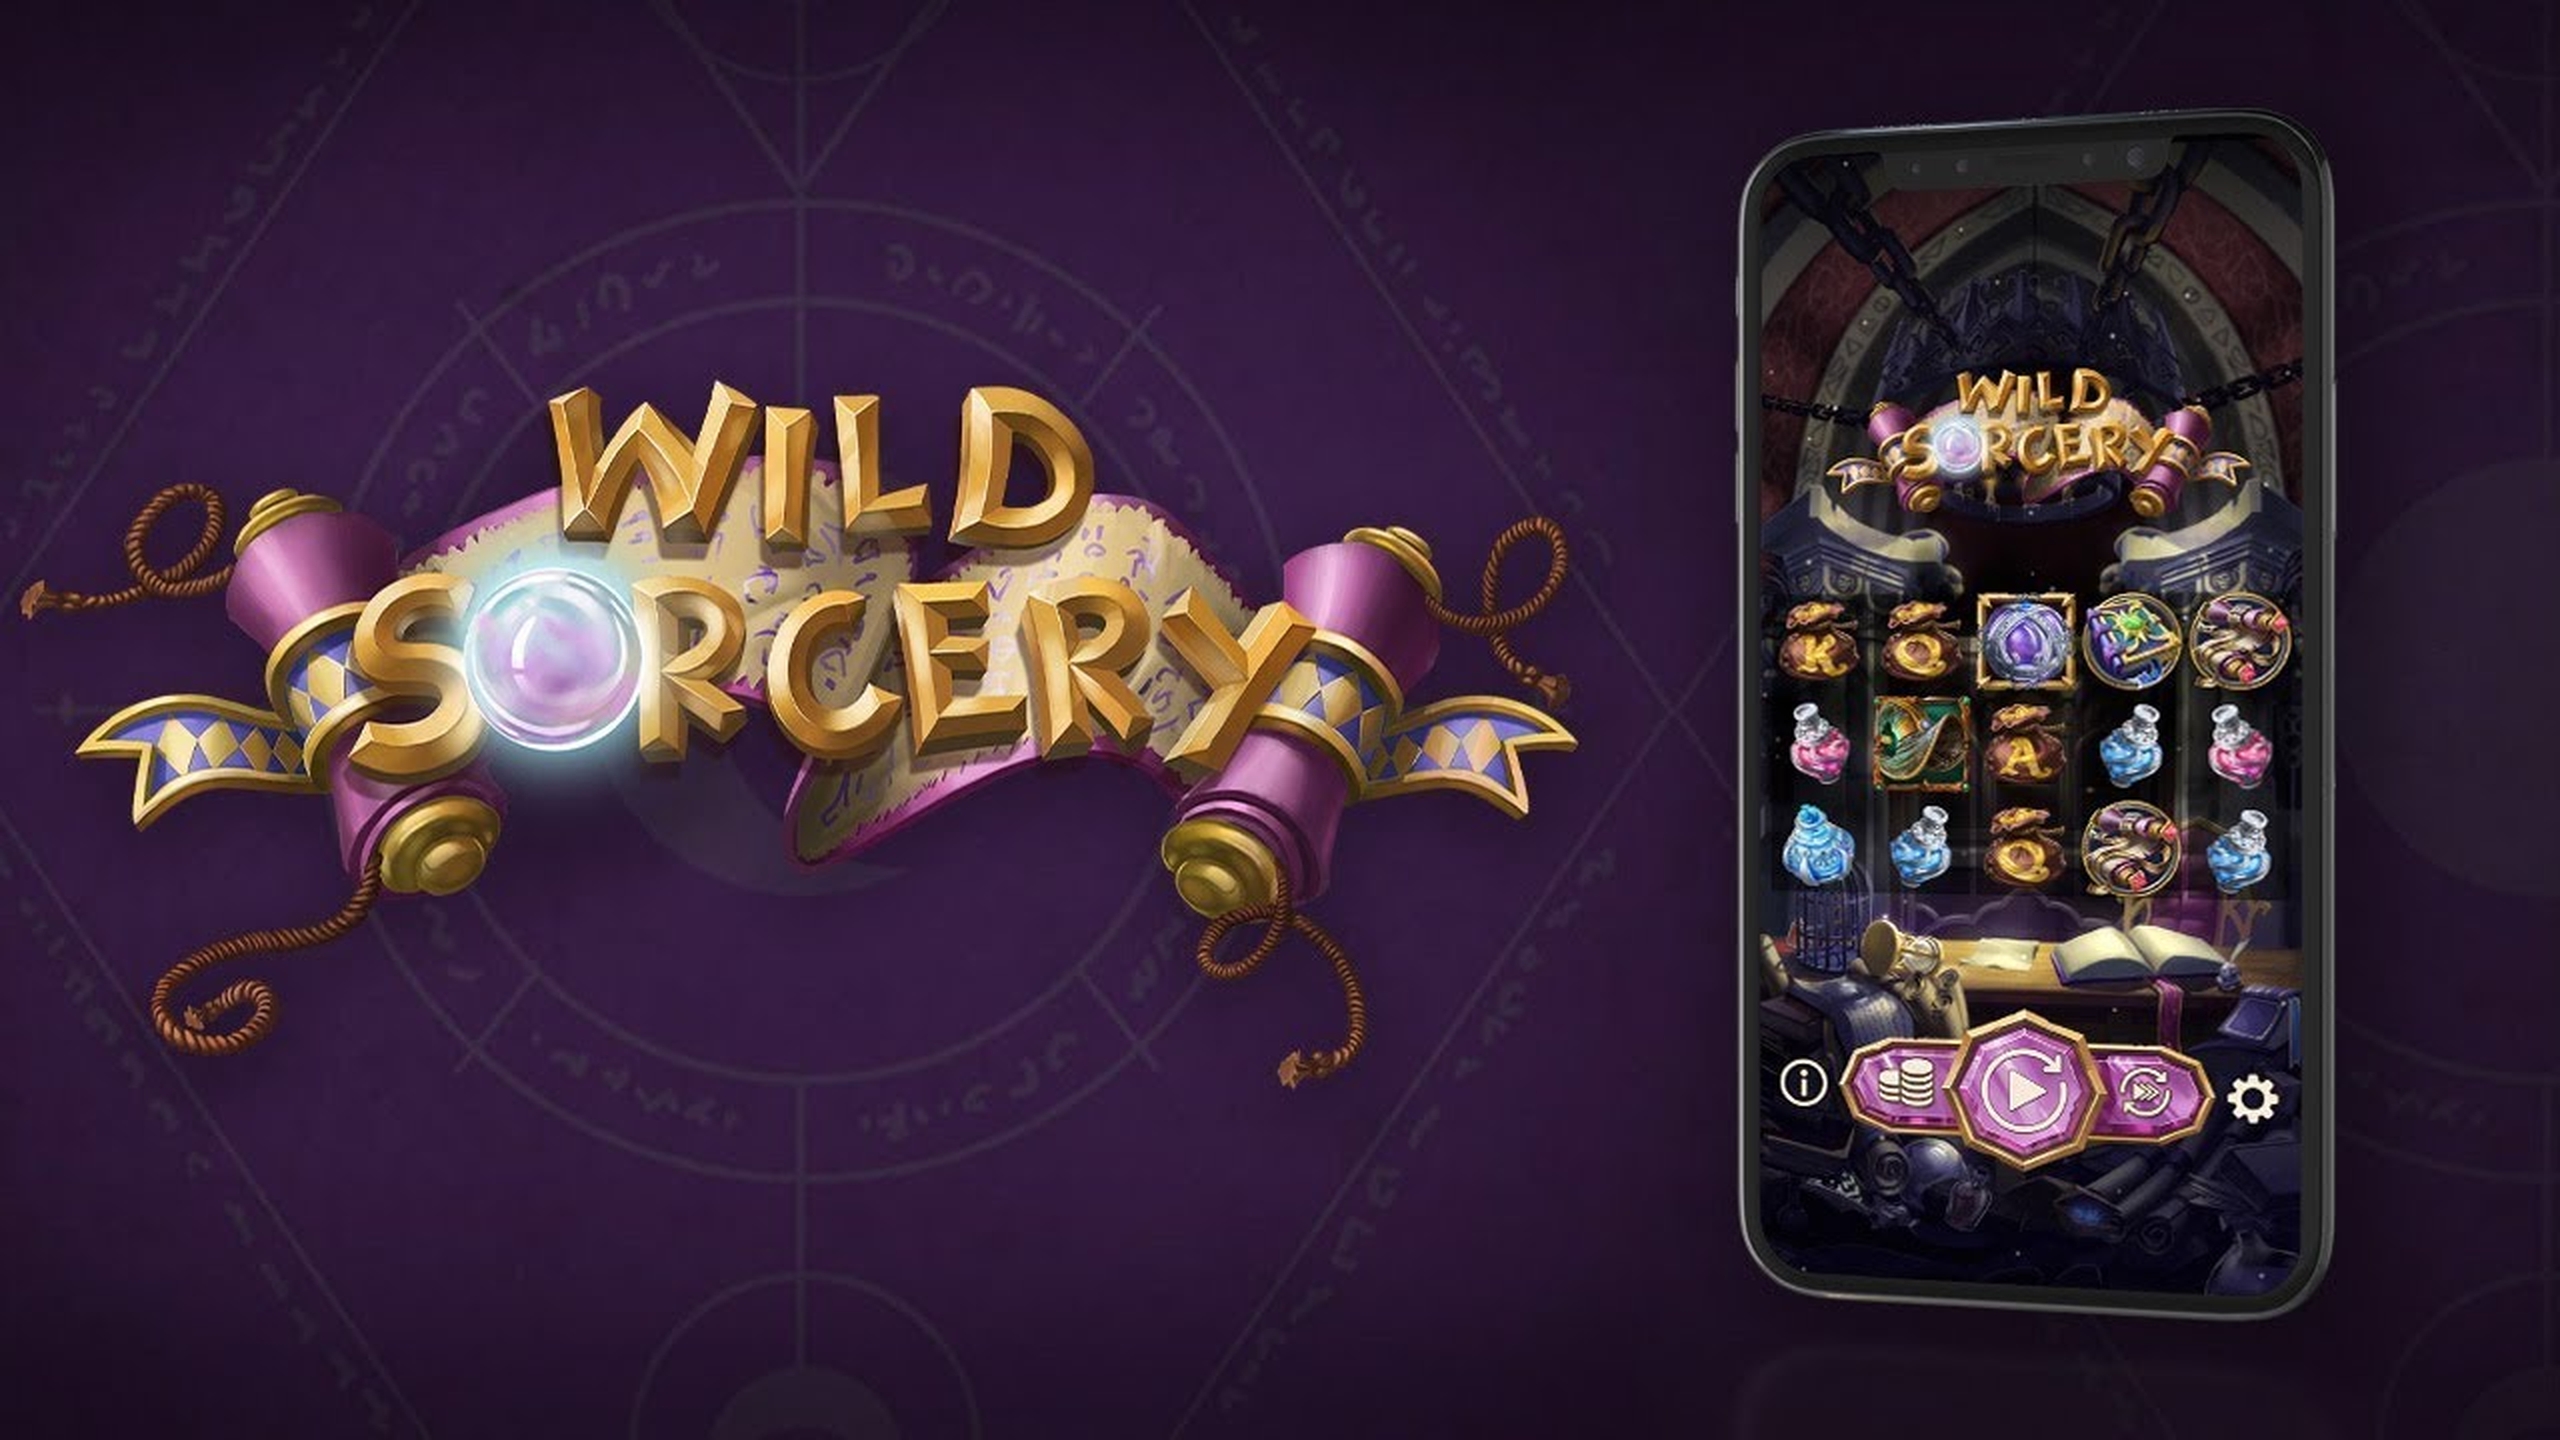 The Wild Sorcery Online Slot Demo Game by OneTouch Games